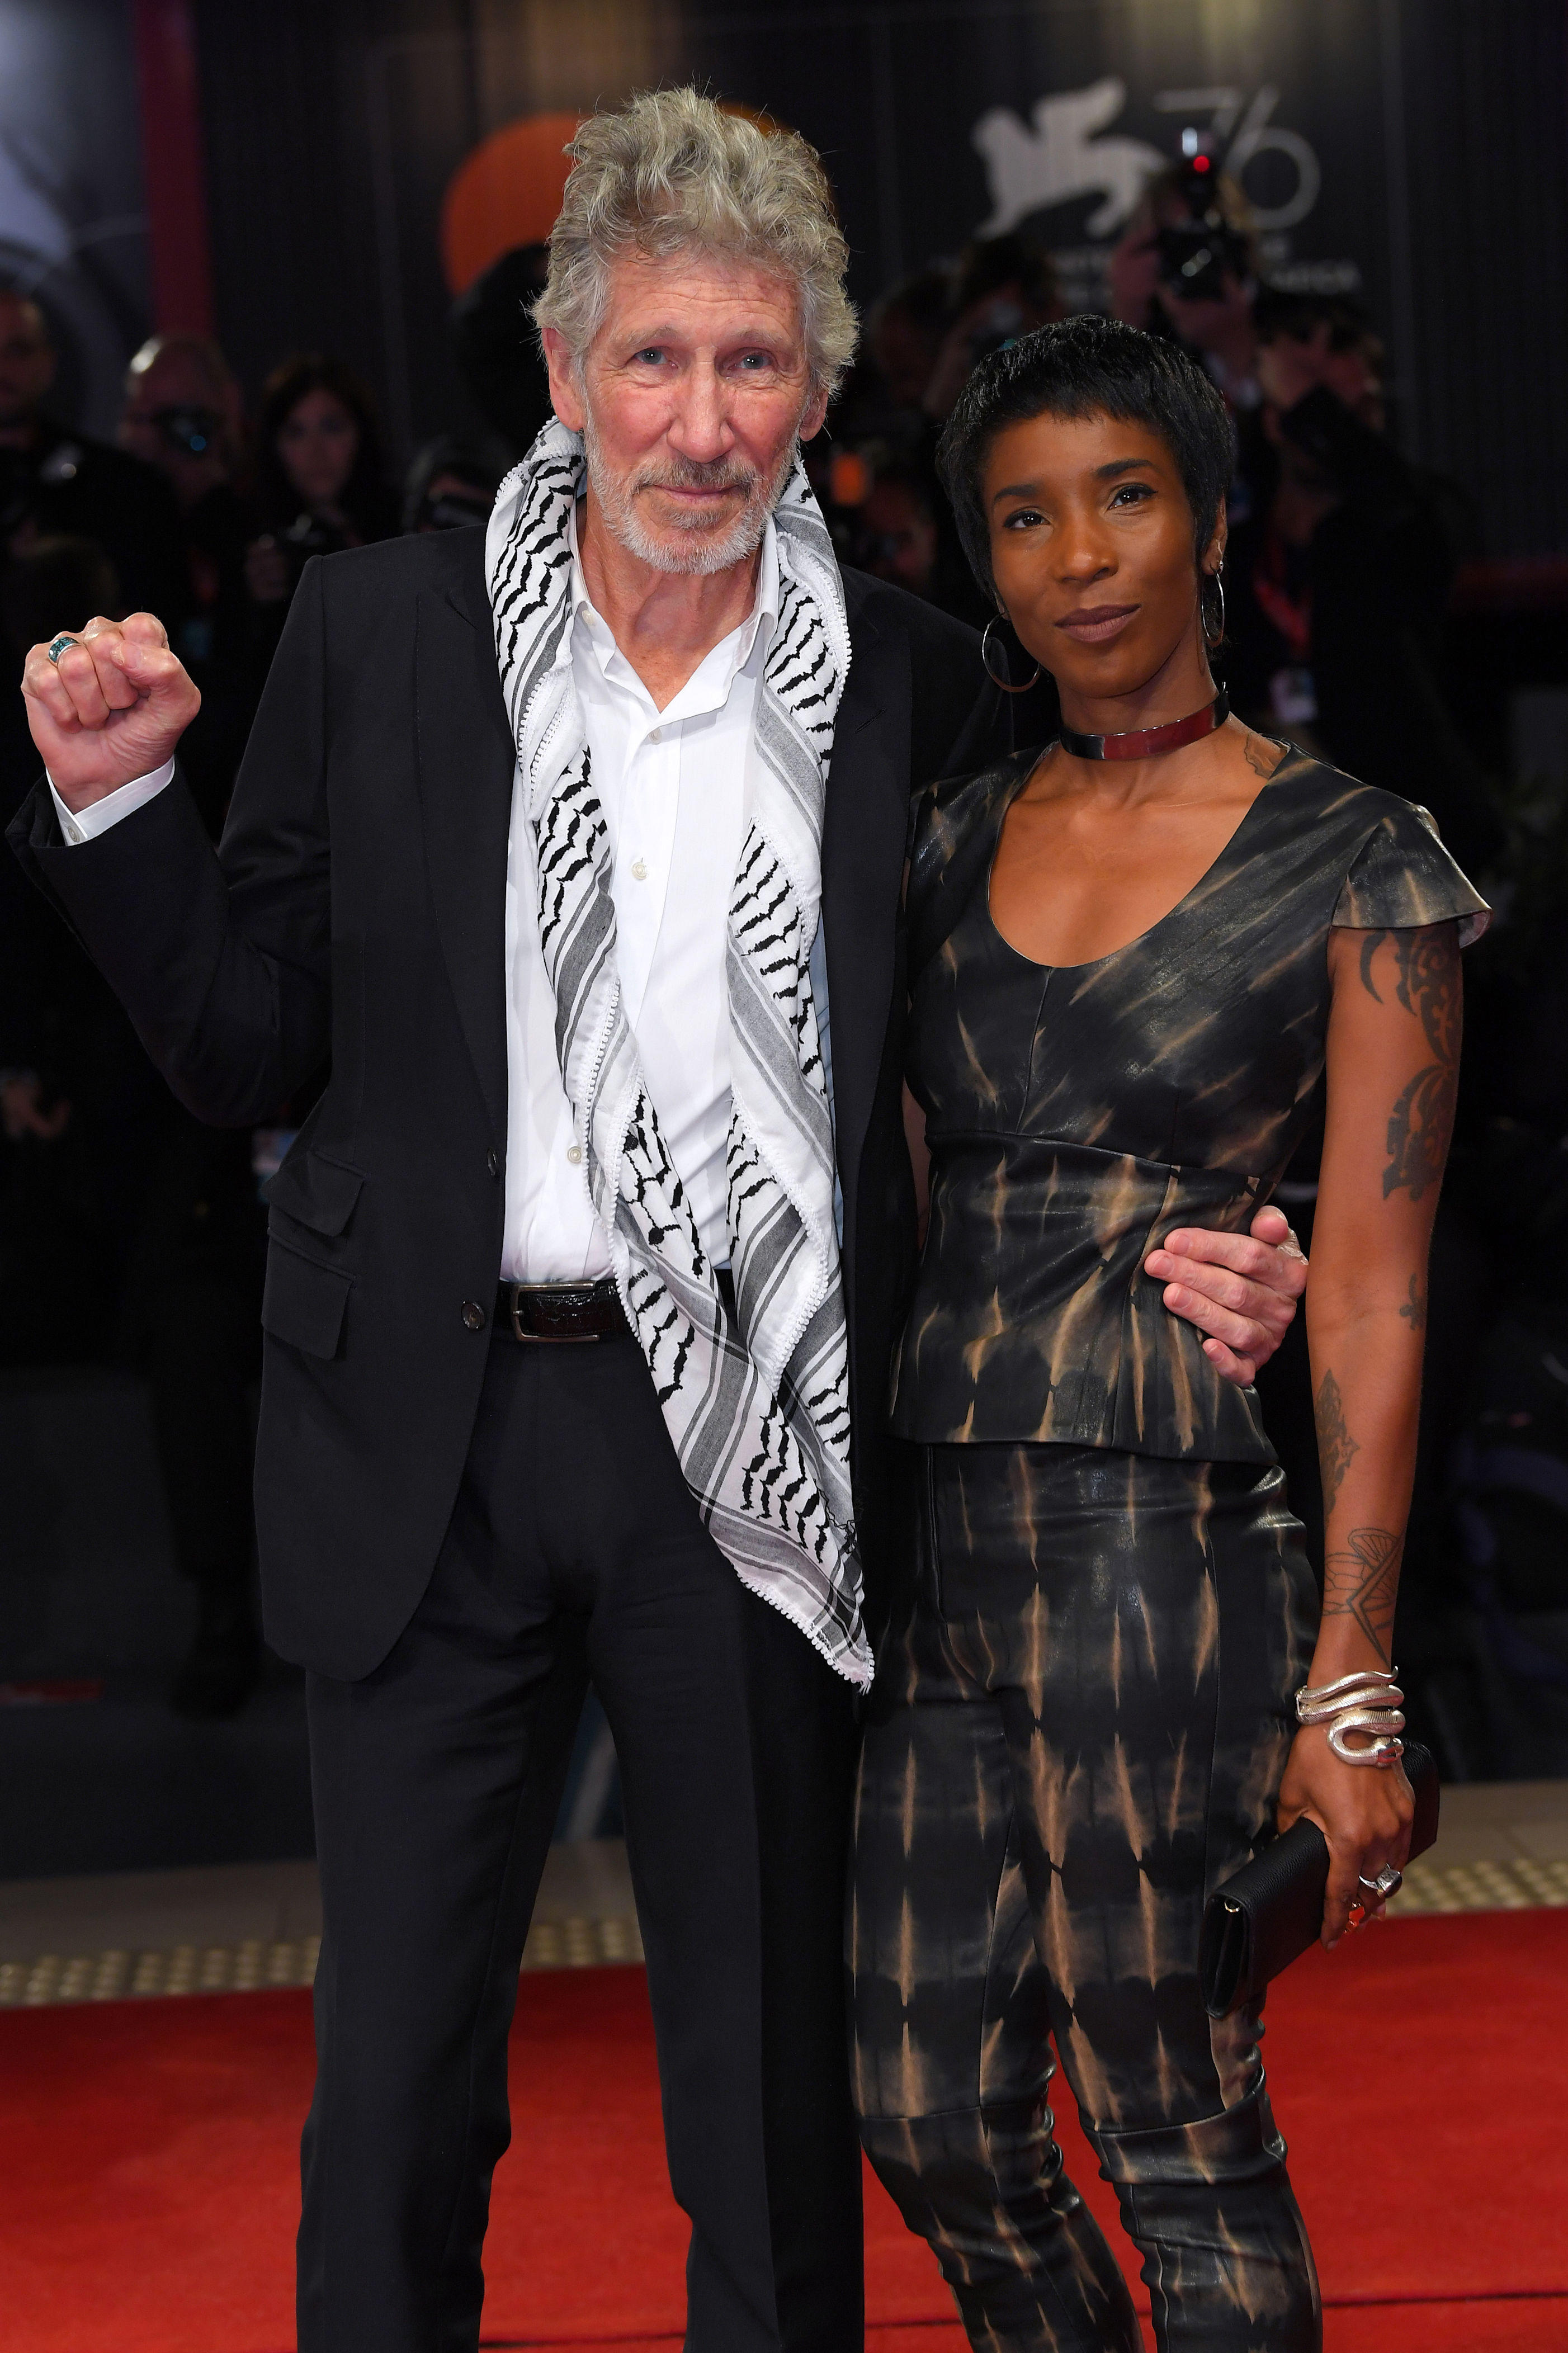 <p><span>Pink Floyd co-founder Roger Waters met his fifth wife, Kamilah Chavis -- whom </span><a href="https://www.wonderwall.com/celebrity/couples/celebrity-weddings-of-2021-famous-people-who-got-married-this-year-465325.gallery?photoId=489159">he married in October 2021</a><span> after five years of dating -- when she worked as his driver. "I actually met her at one of my concerts a couple of years ago. She worked in transportation. She was driving the car that was taking me [around]," the rock star told </span><a href="https://www.infobae.com/teleshow/2018/11/05/a-solas-con-roger-waters-llore-mucho-ame-mucho-cometi-muchos-errores-y-tuve-la-cantidad-justa-de-alegria/">Infobae</a><span> in 2018, as reported by </span><a href="https://pagesix.com/2021/10/14/pink-floyds-roger-waters-marries-kamilah-chavis/">Page Six</a><span>, which further reported the couple met at the 2016 Coachella Valley Music & Arts Festival. "I was in one place for two weeks and there were many transfers between the hotel and the venue. My security sat in the front with her and they talked, while I stayed in the back. I don't know, something about her attracted me..." He soon made his move. "One day I said 'Excuse me,' and she turned around. [I said], 'Did someone ever tell you that you have beautiful cheekbones?' I saw a little reaction, and that was the beginning."</span></p>